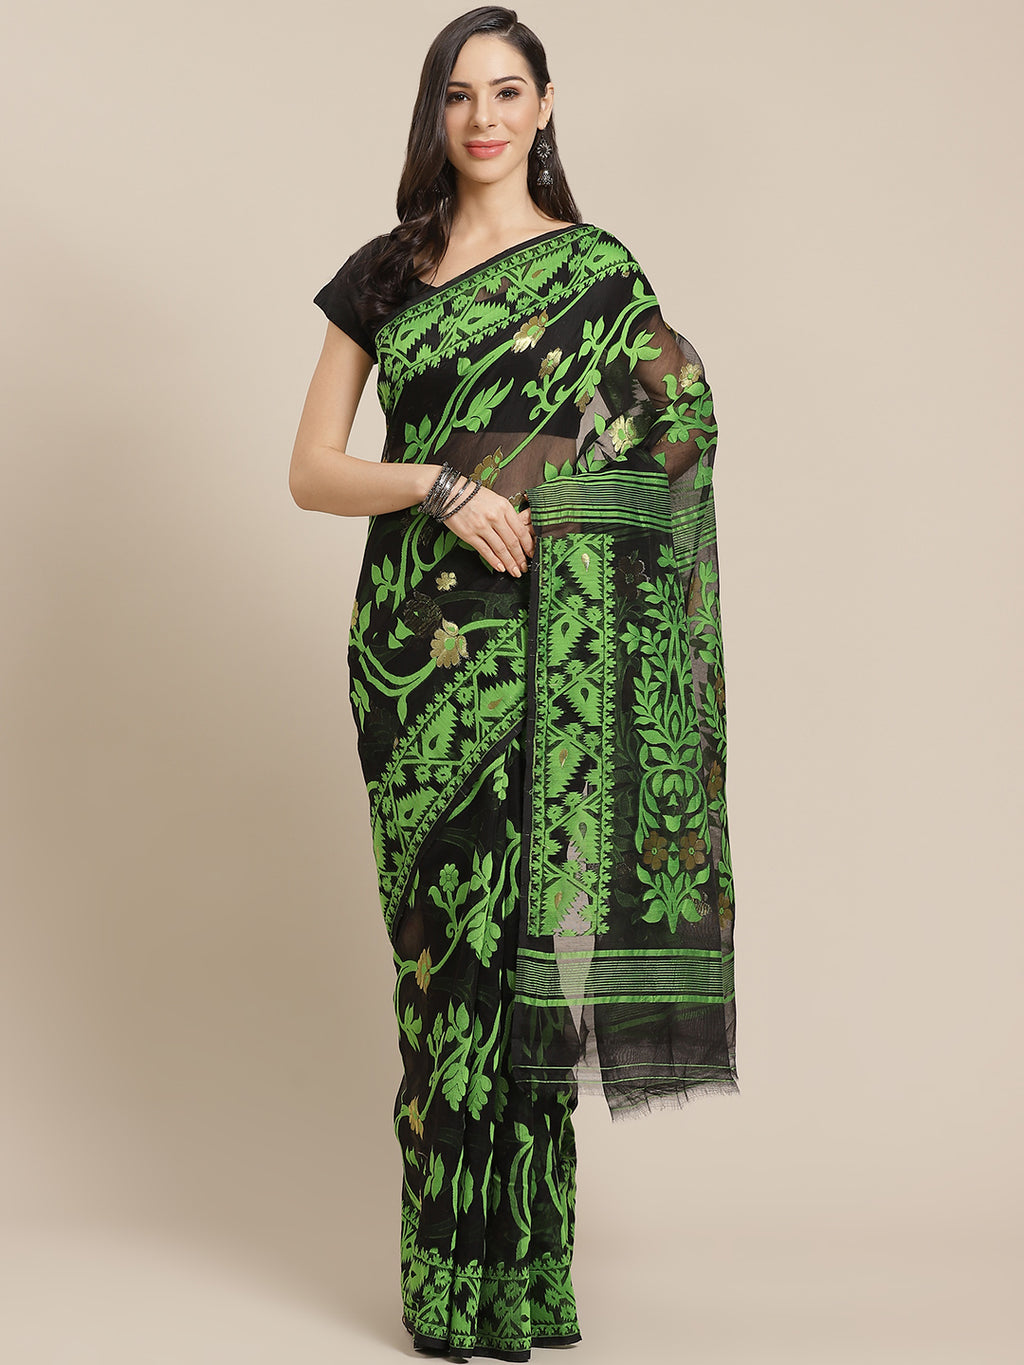 Black and Green, Kalakari India Jamdani Silk Cotton Woven Design Saree without blouse CHBHSA0040-Saree-Kalakari India-CHBHSA0040-Bengal, Geographical Indication, Hand Crafted, Hand Painted, Heritage Prints, Jamdani, Natural Dyes, Red, Sarees, Silk Blended, Sustainable Fabrics, Woven, Yellow-[Linen,Ethnic,wear,Fashionista,Handloom,Handicraft,Indigo,blockprint,block,print,Cotton,Chanderi,Blue, latest,classy,party,bollywood,trendy,summer,style,traditional,formal,elegant,unique,style,hand,block,prin